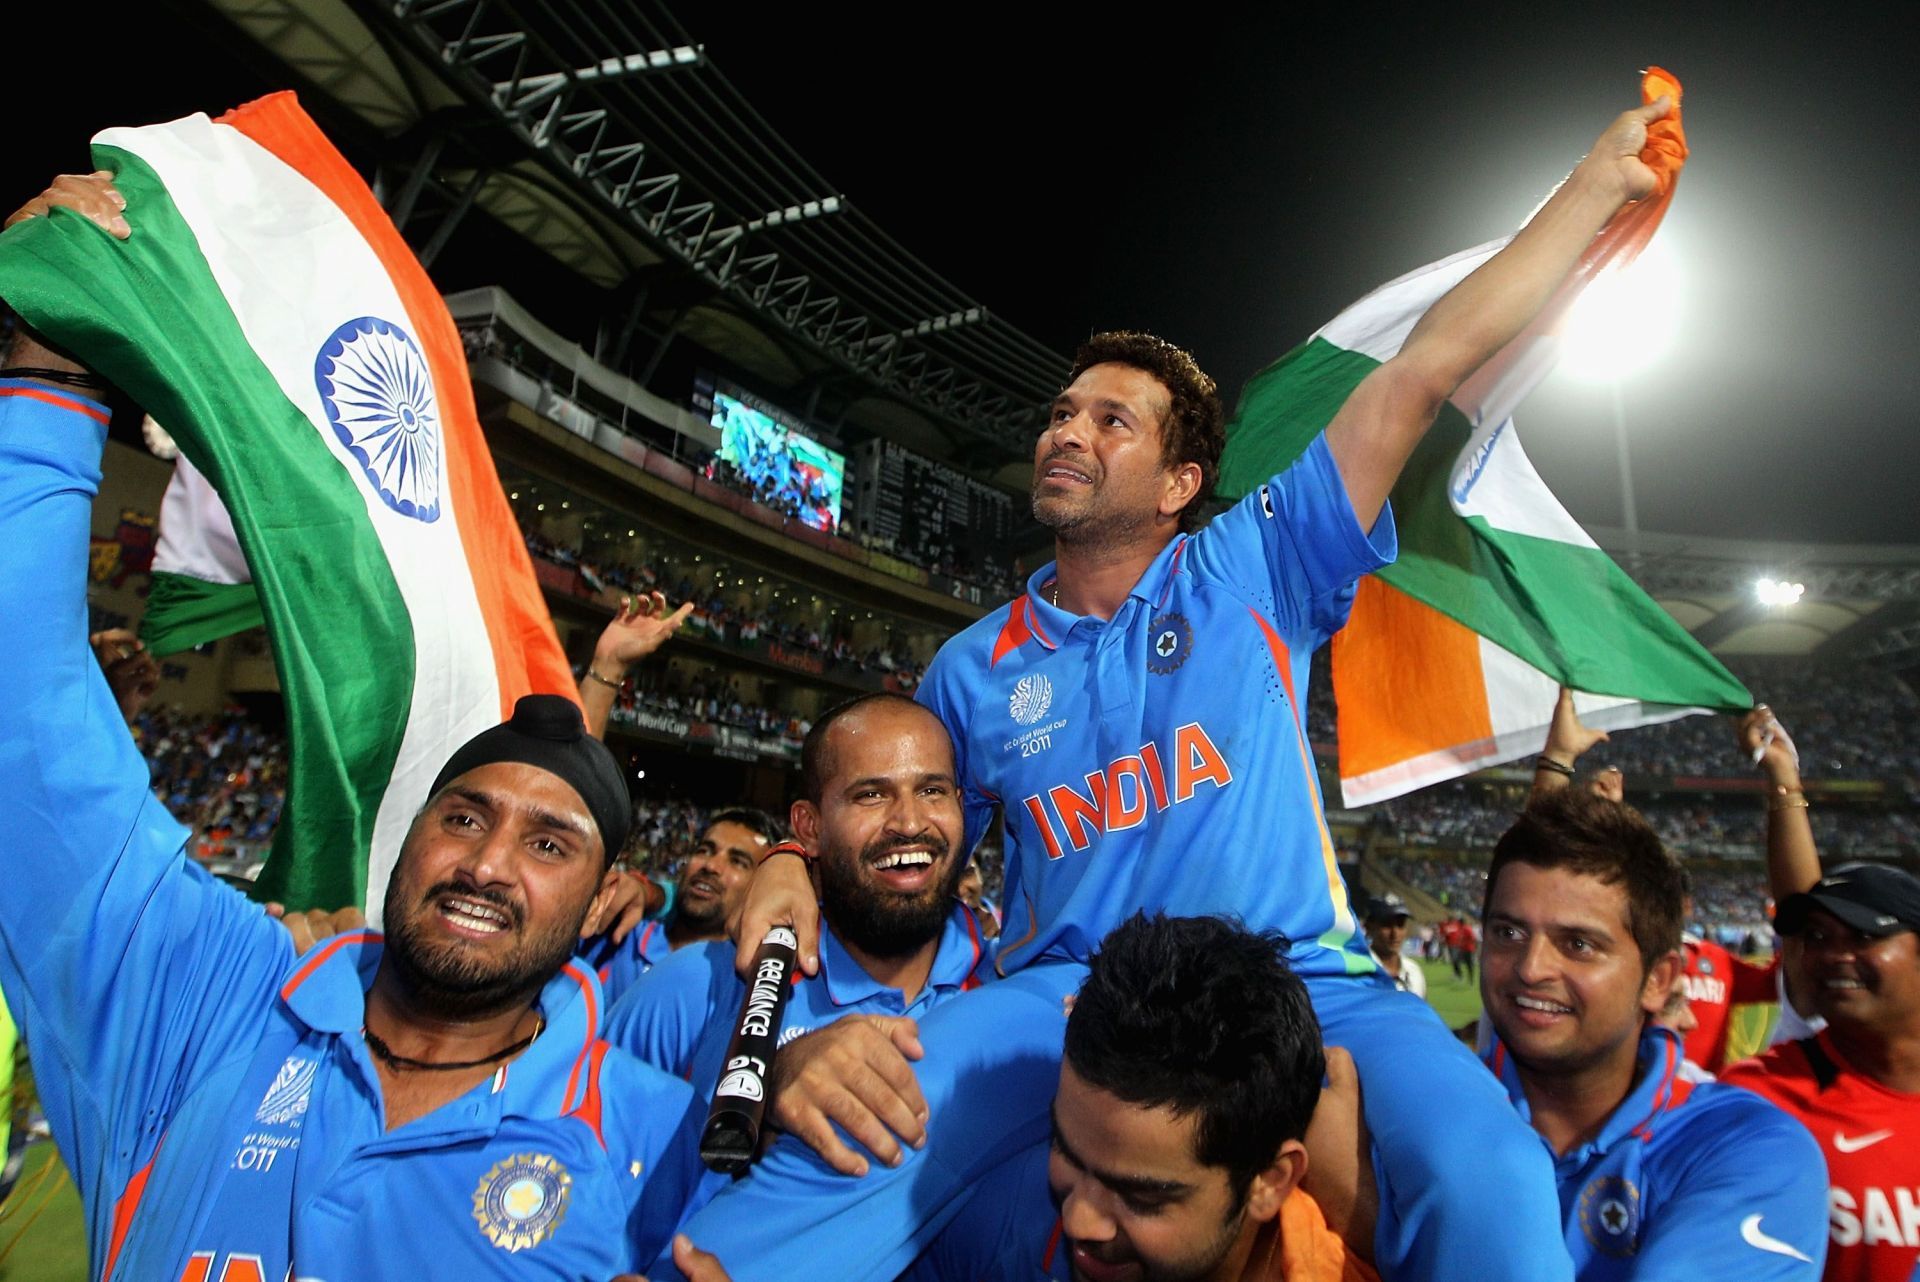 Virat Kohli carries Sachin Tendulkar on his shoulders for lap of honor after winning the World Cup in 2011.